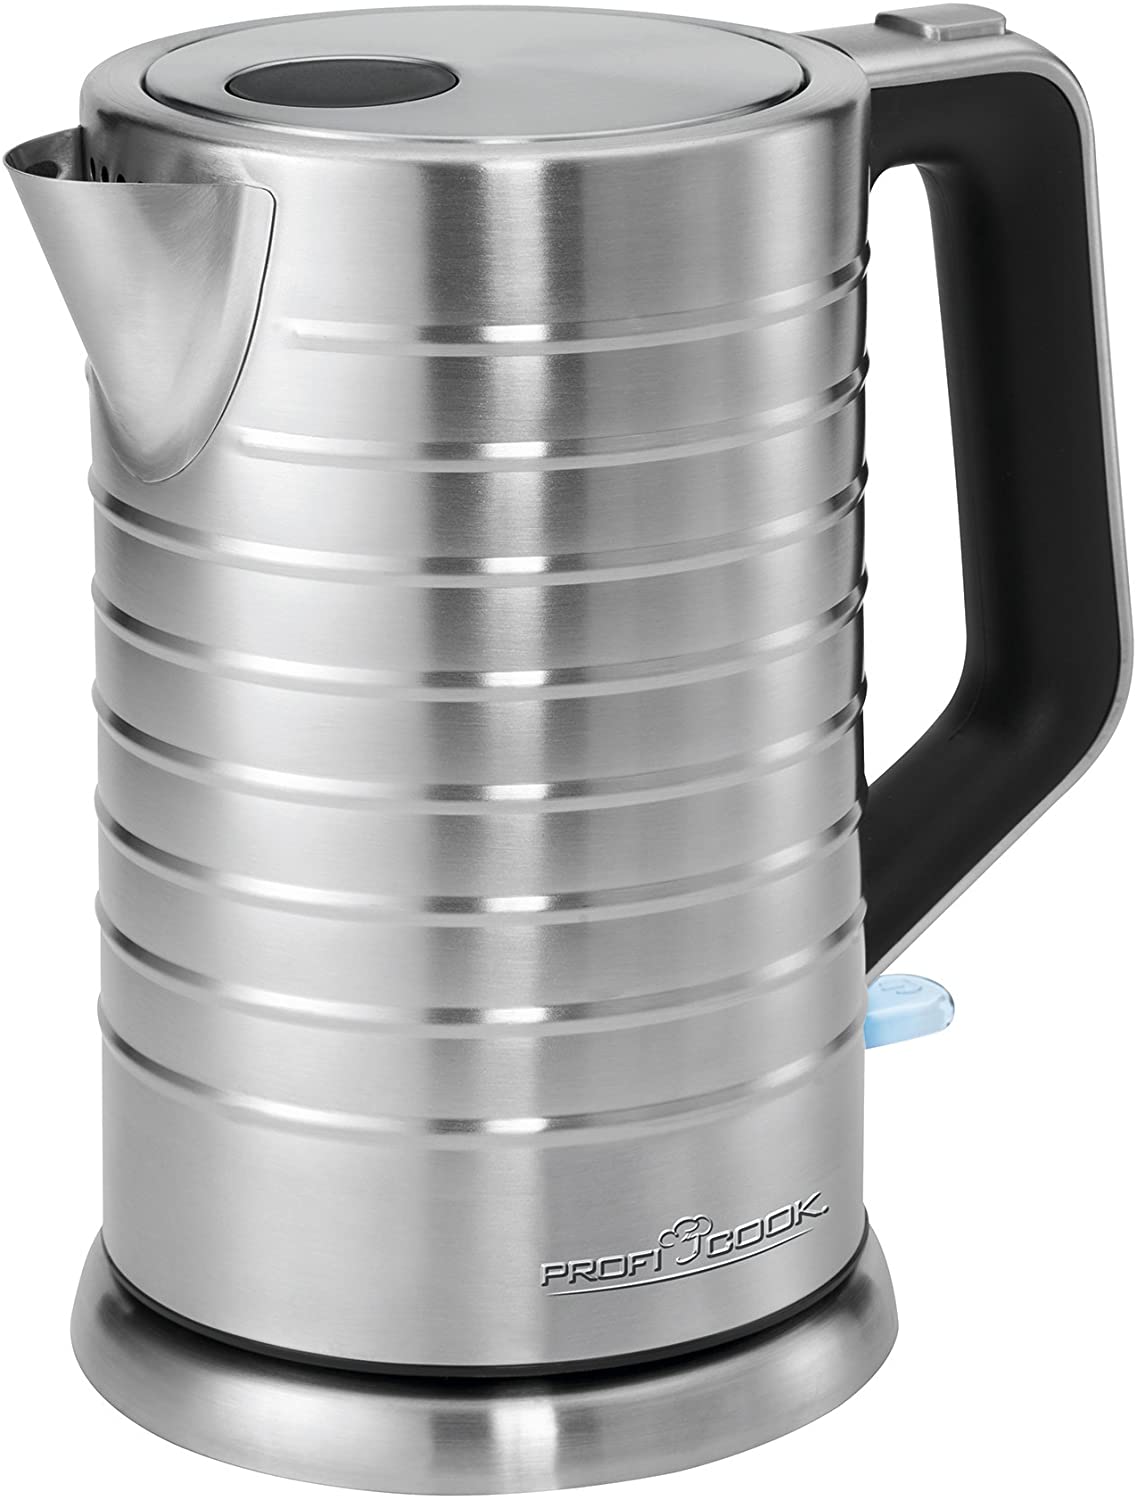 Profi Cook ProfiCook PC-WKS 1119 Kettle 1.7 Litres 1850-2200 W Stainless Steel with Water Level Indicator